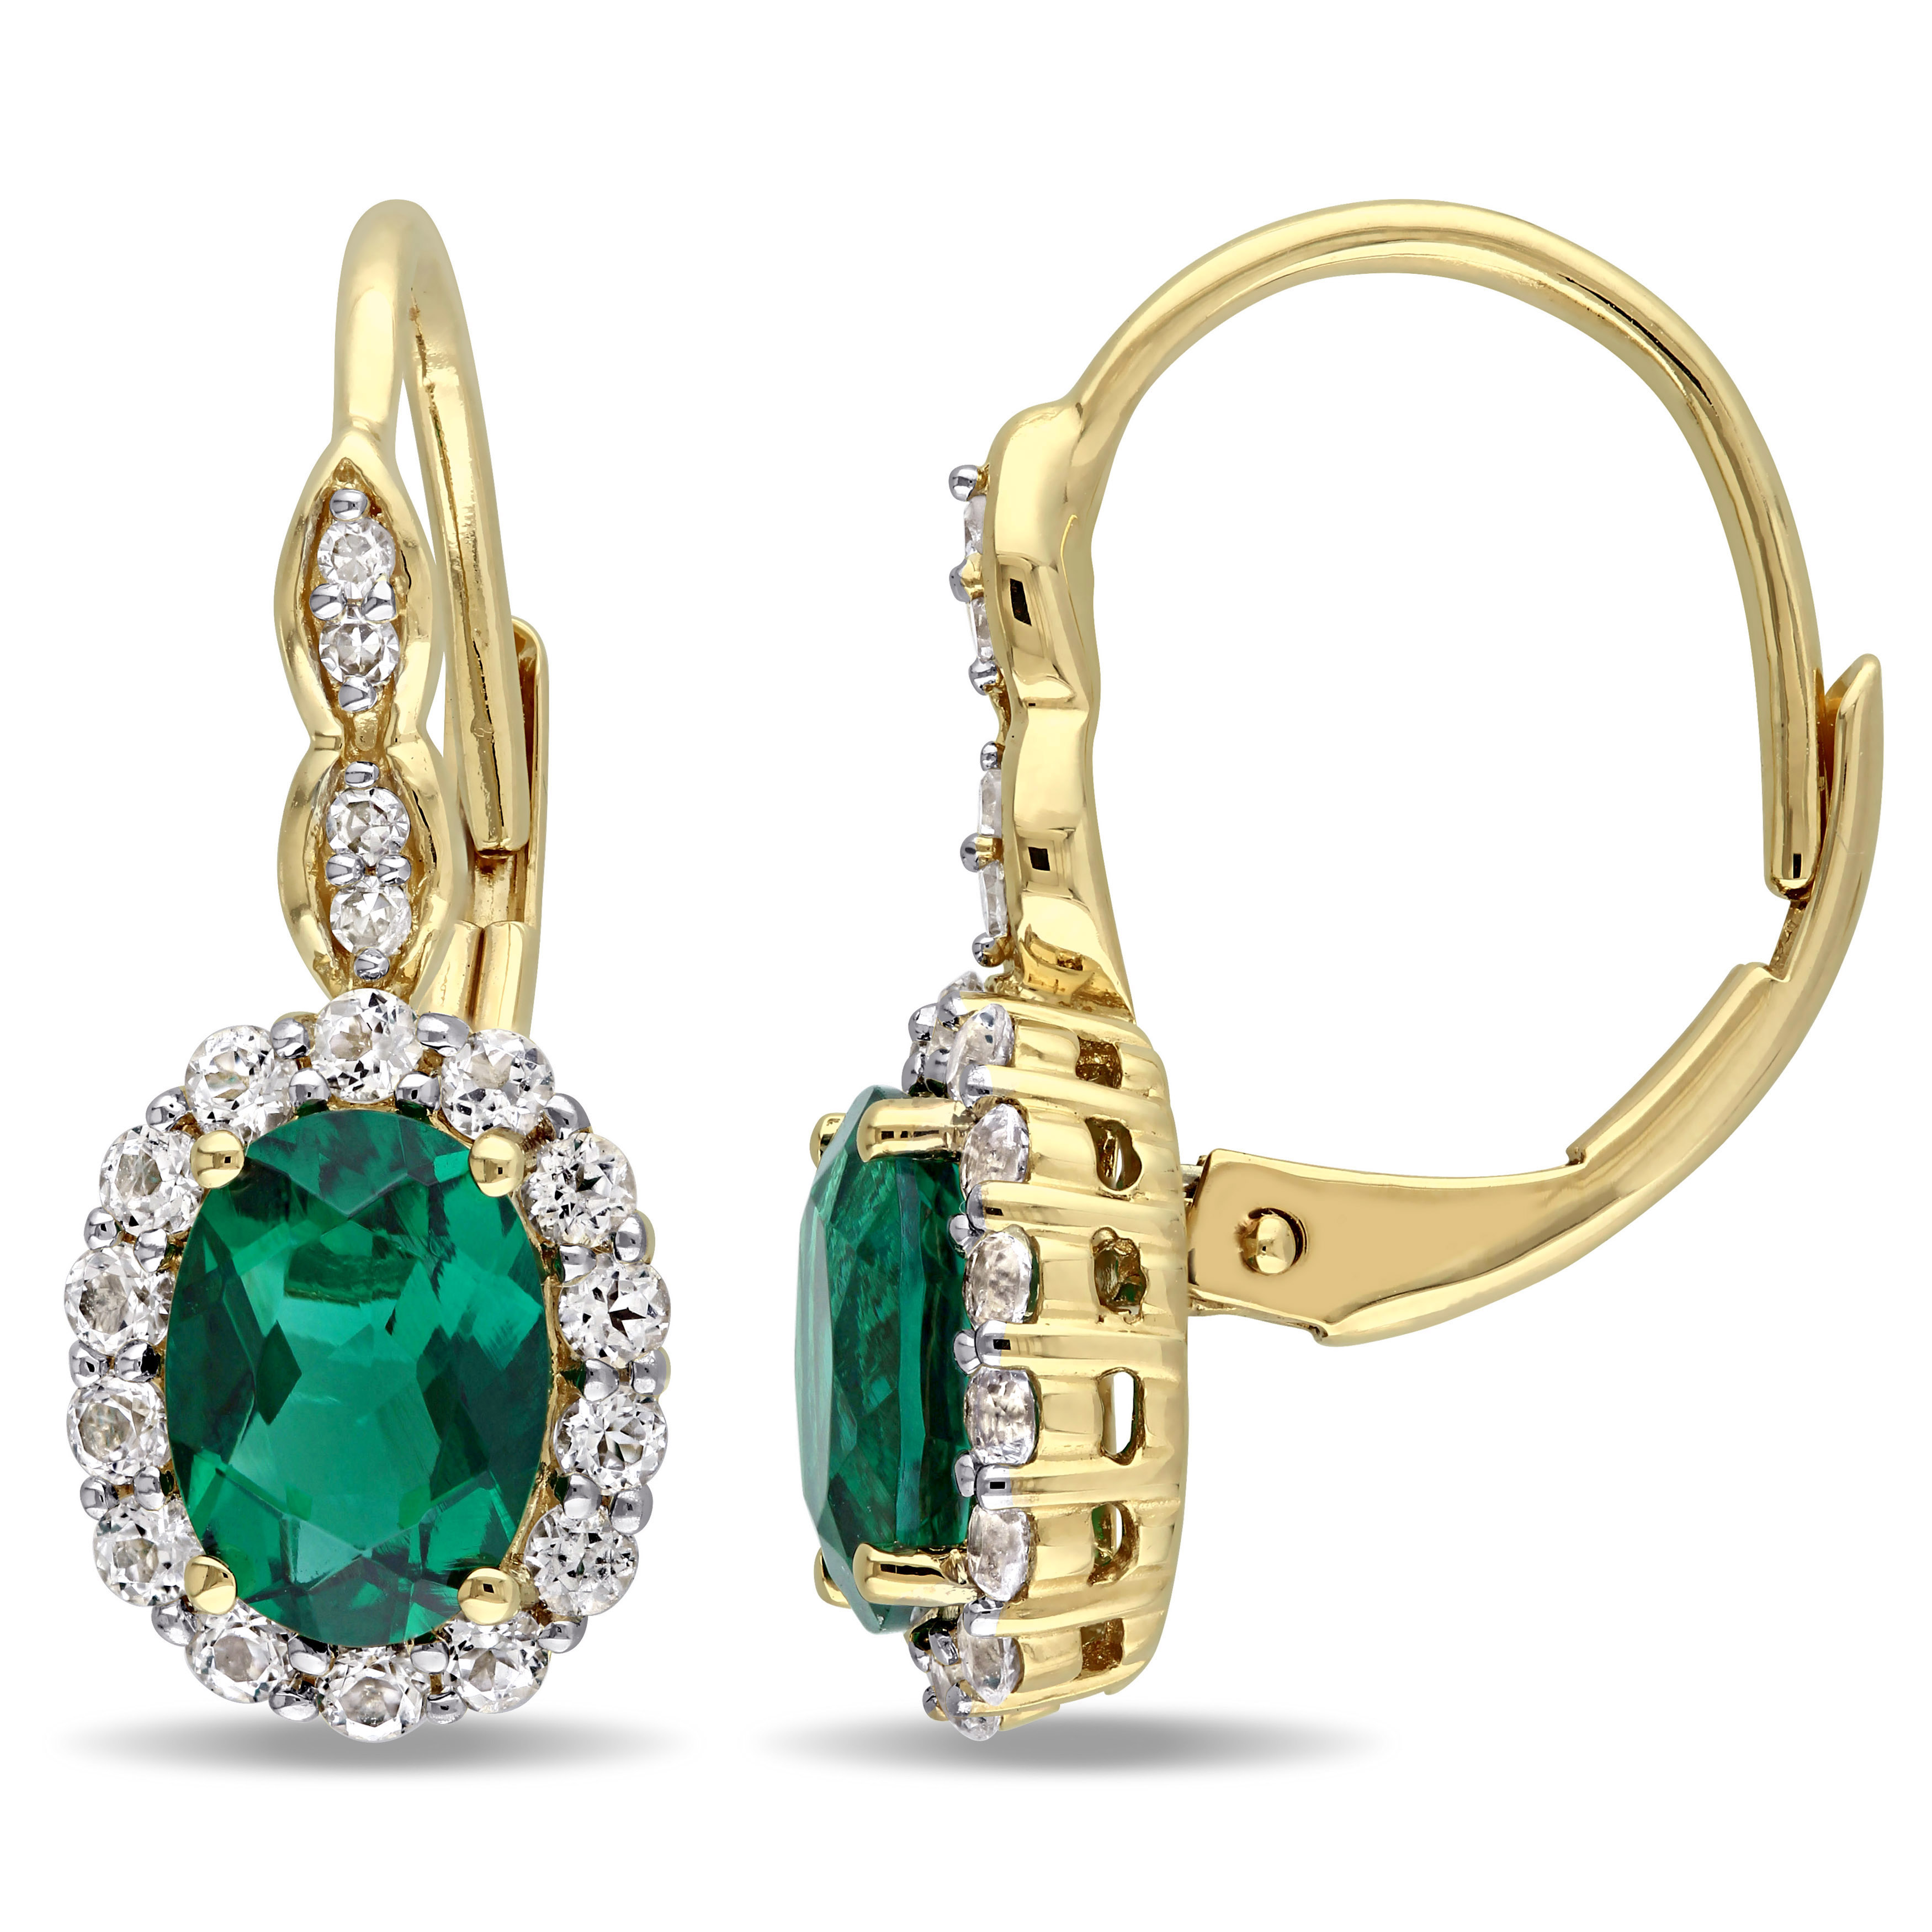 2 1/4 CT TGW Oval Shape Created Emerald, White Topaz and Diamond Accent Vintage LeverBack Earrings in 14k Yellow Gold